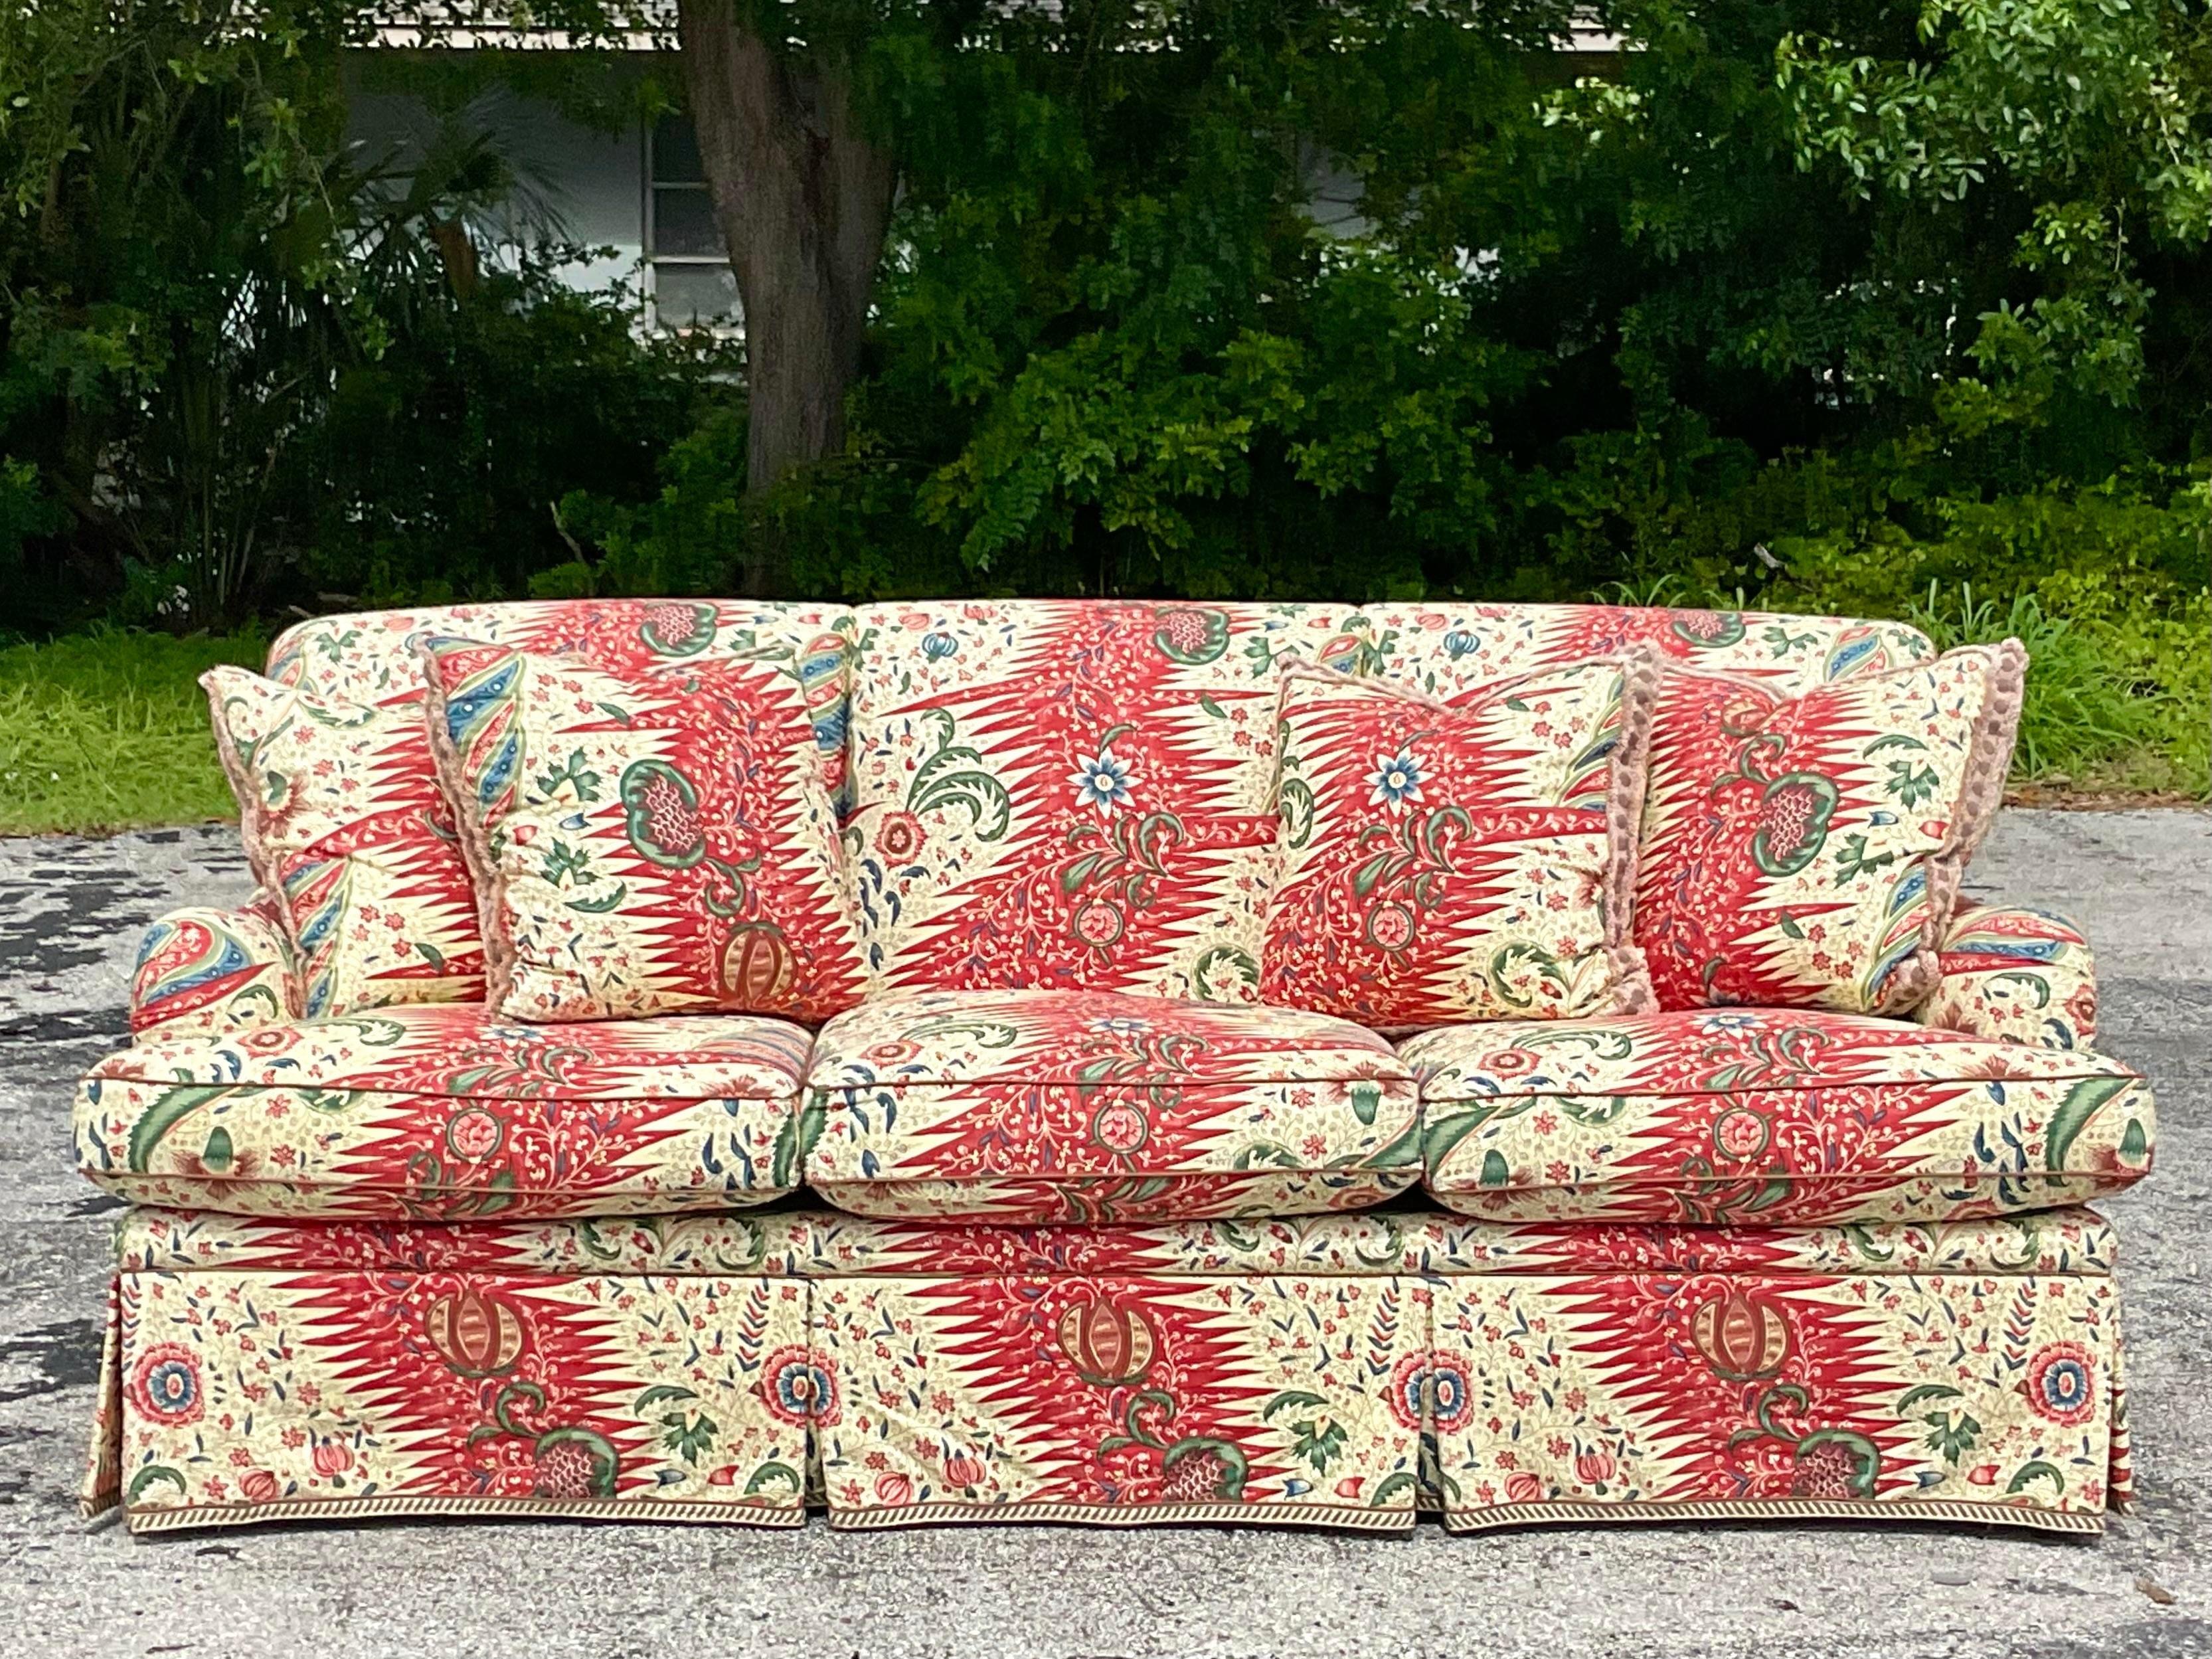 A spectacular vintage Boho custom down sofa. Upholstered in the extraordinary Pierre Frey’s “La Rivière Enchantee” fabric. Beautiful solid construction with a roll back and box pleat skirt. Lots of amazing trims and fringe to complete the look.